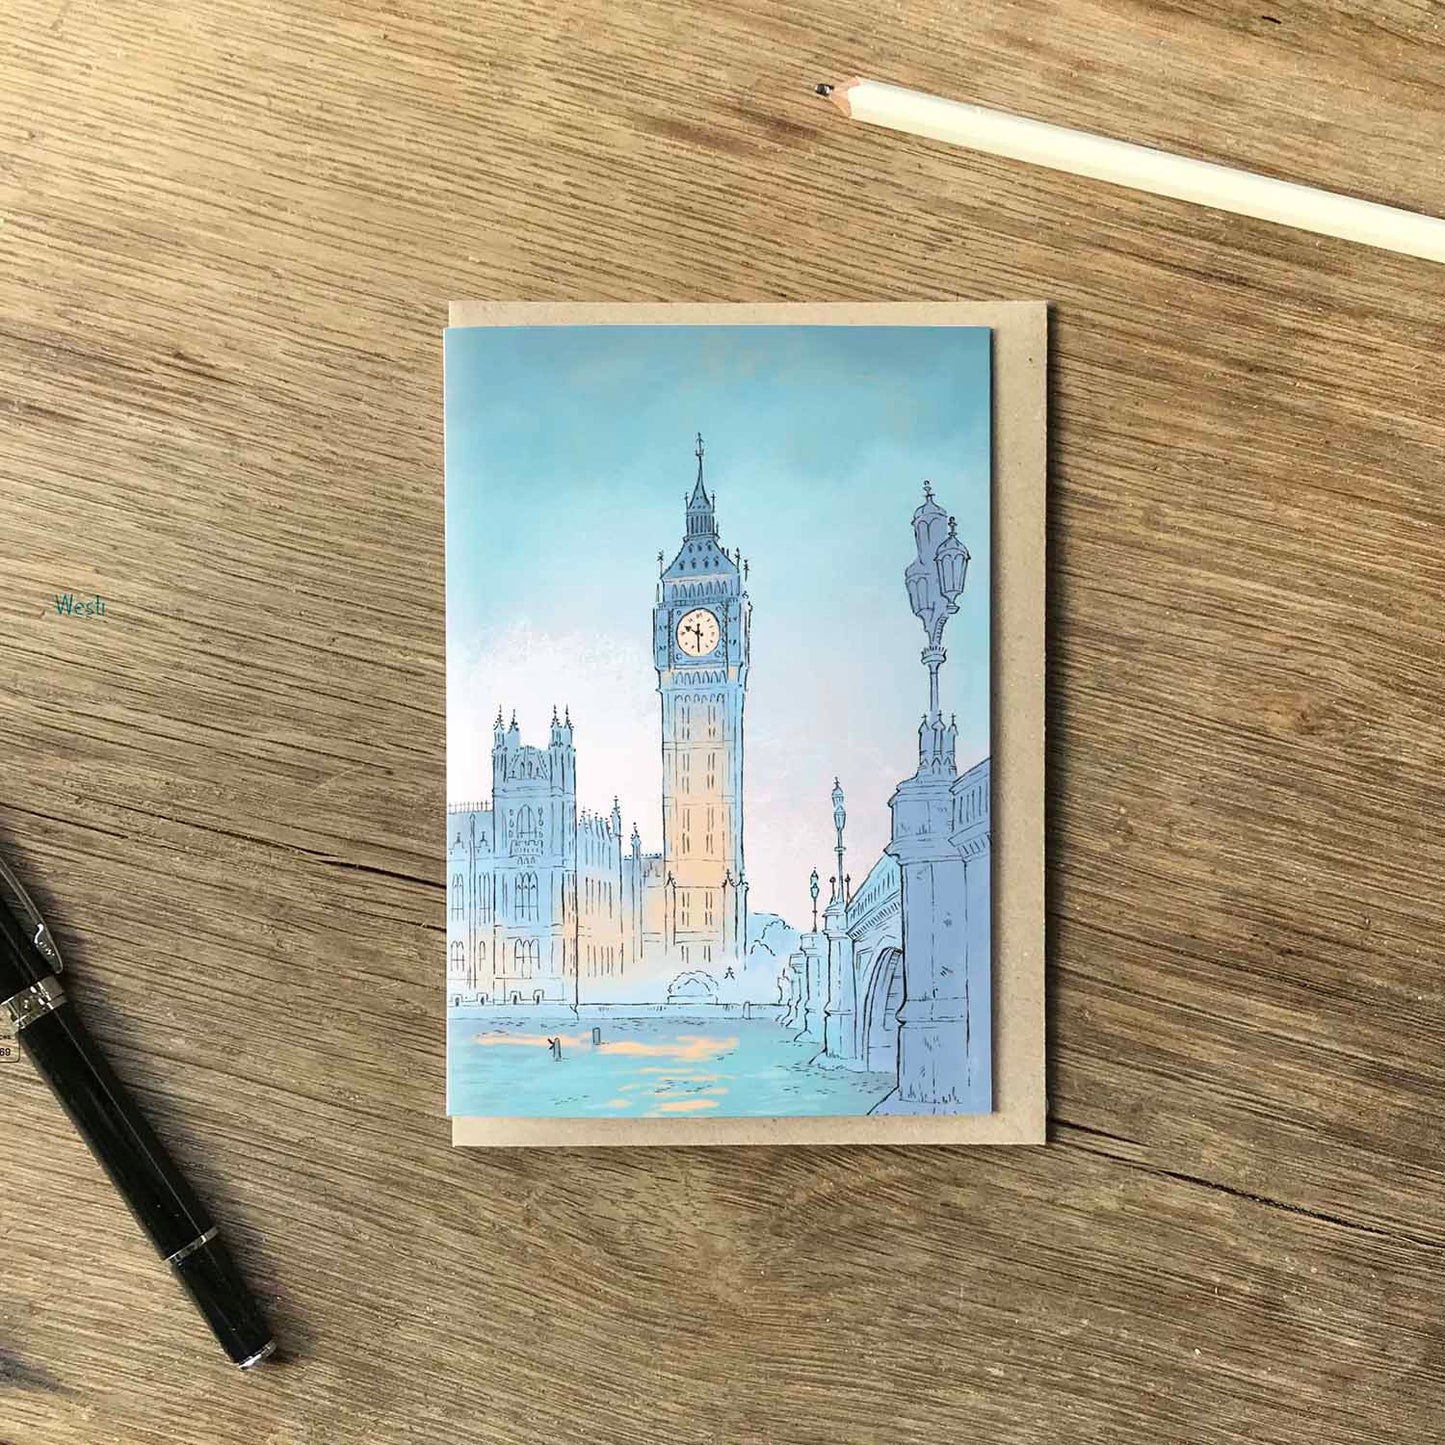 London's big ben at twilight beautifully illustrated on a greeting card by mike green illustration.